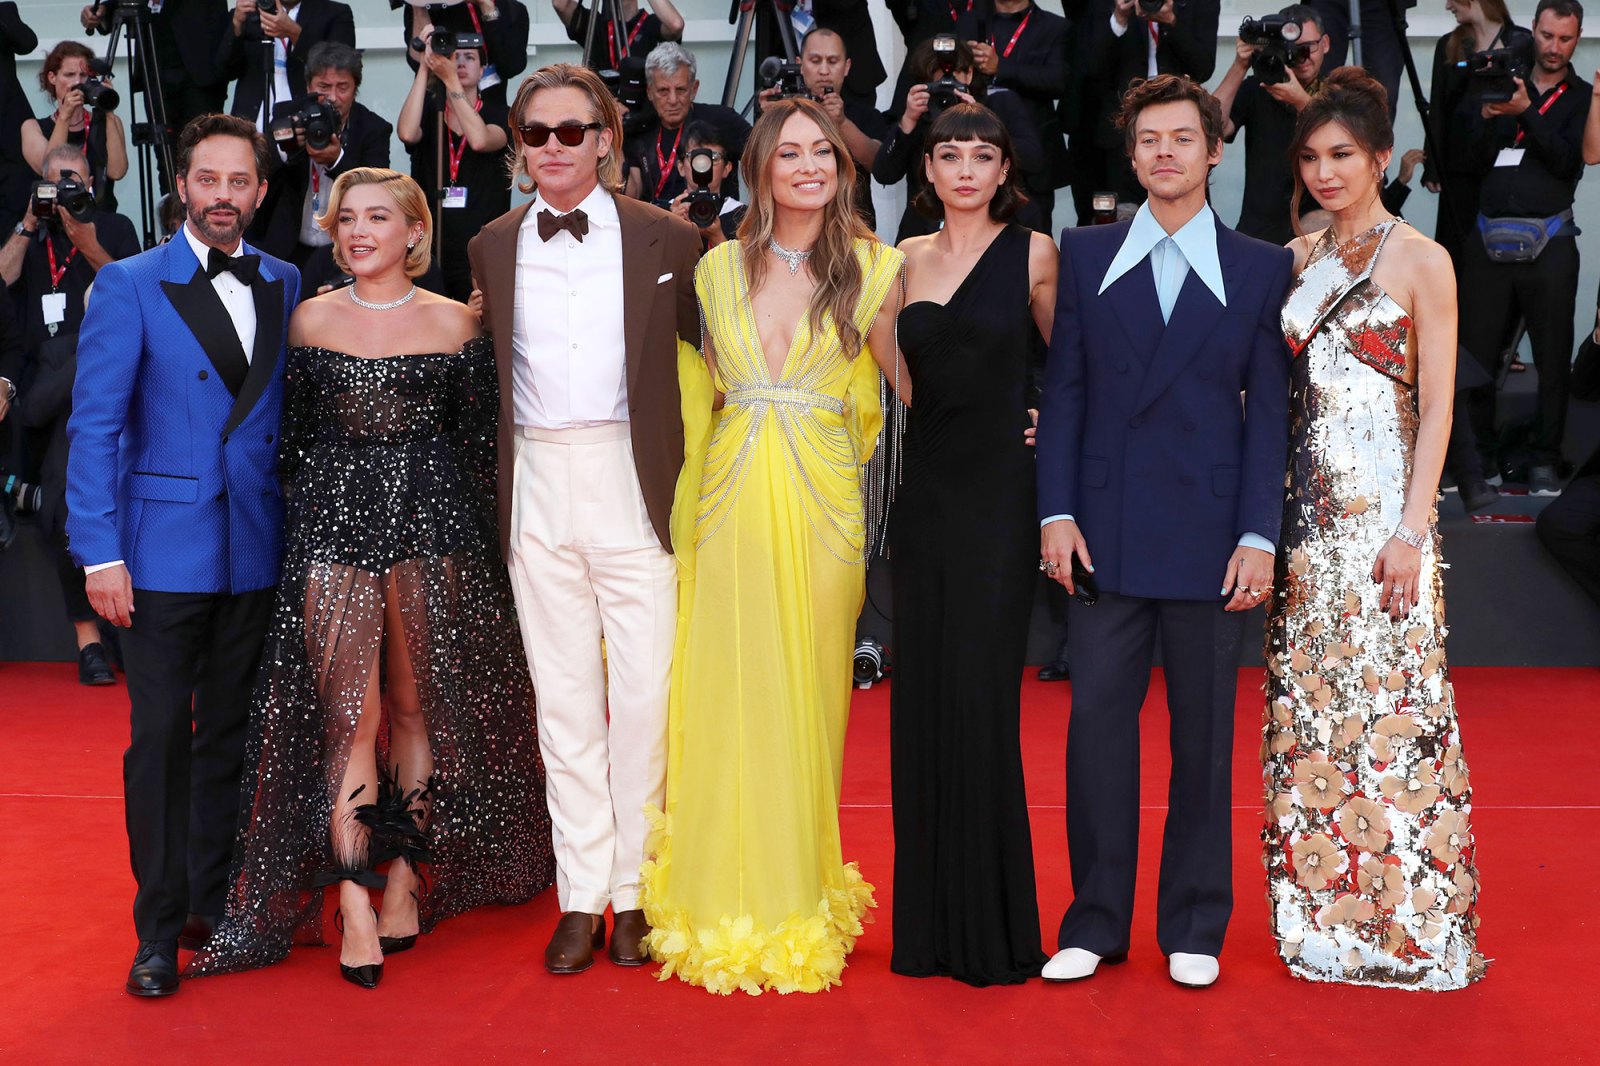 Florence Pugh Gushes Over 'Mega' Premiere of 'Don't Worry Darling' Amid Drama 3